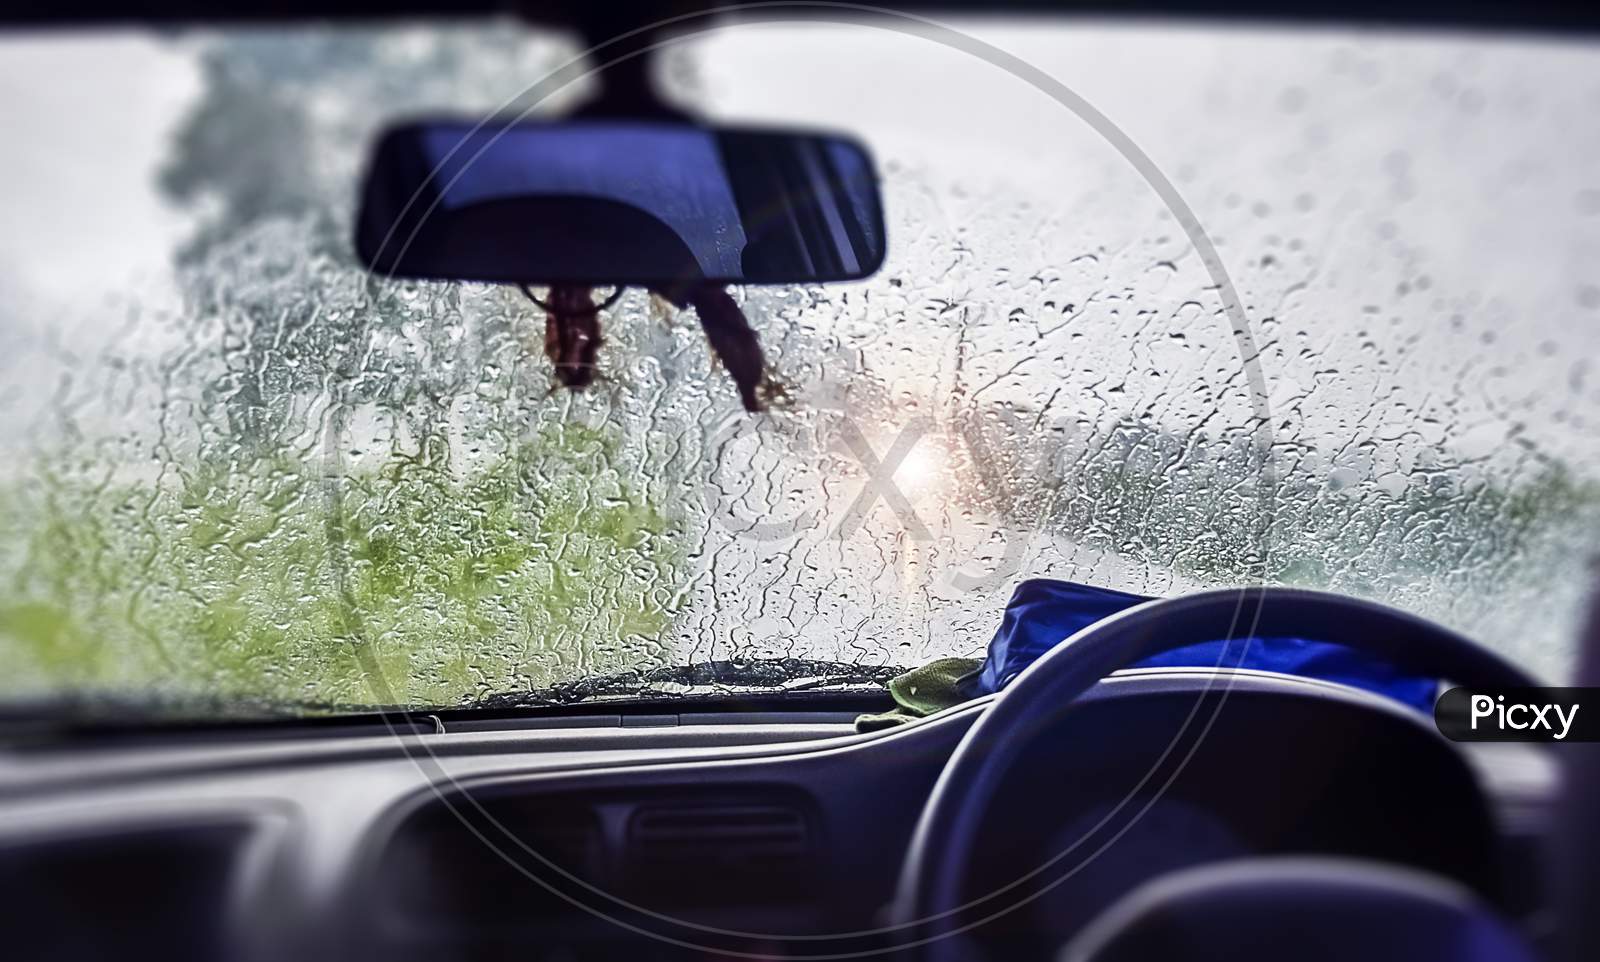 Abstract Capture Of Natural Water Drop On The Window Glass From Inside The Car With Condensation During Rainy Day Traveling On Drive By Road. Asansol, India, Asia, 13Th July 2021.